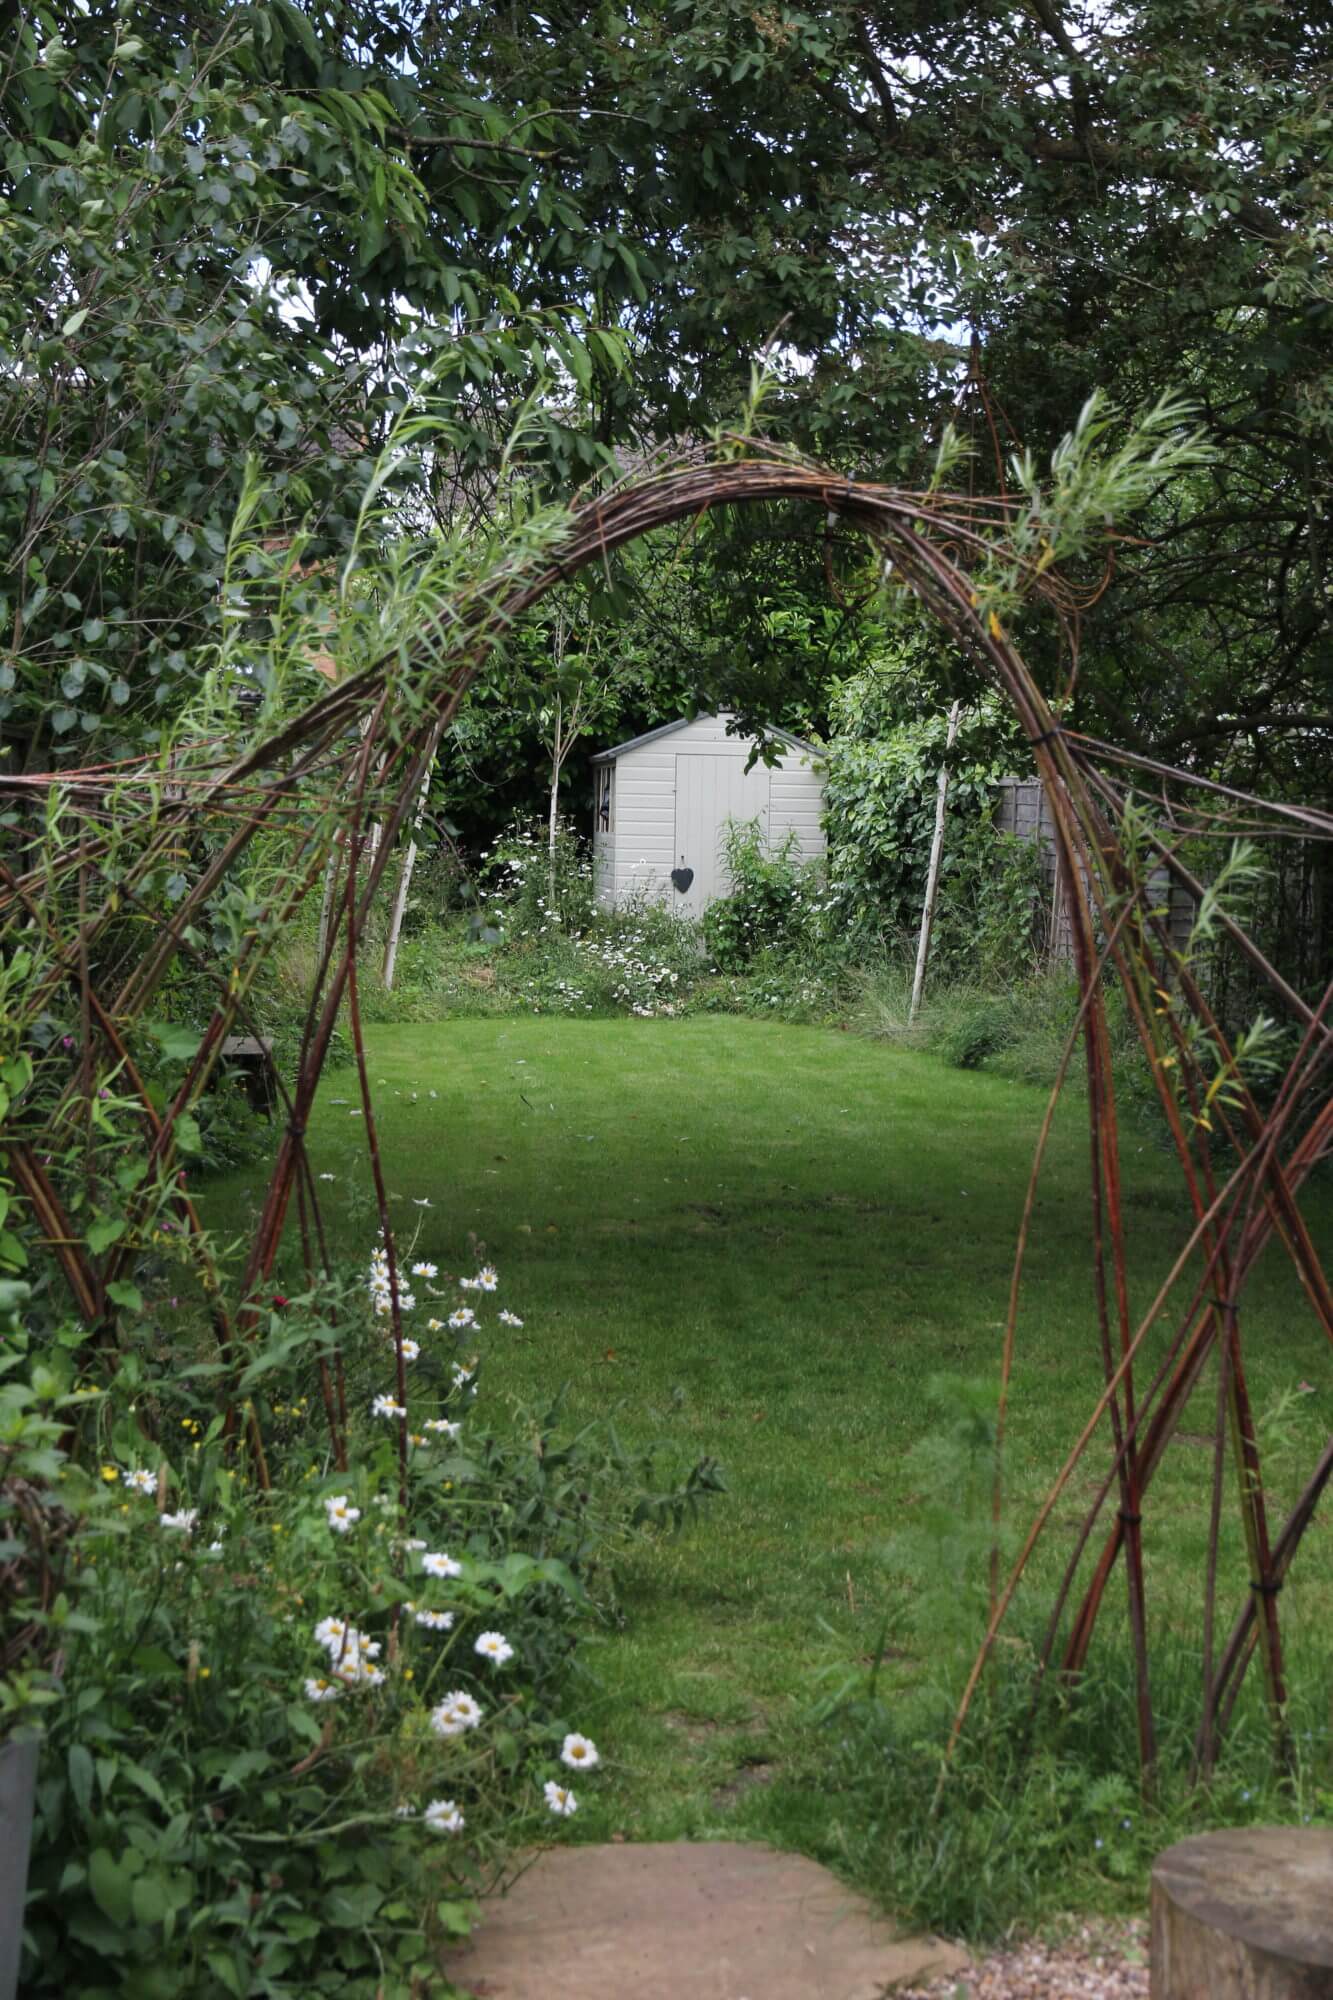 Woven willow arch way